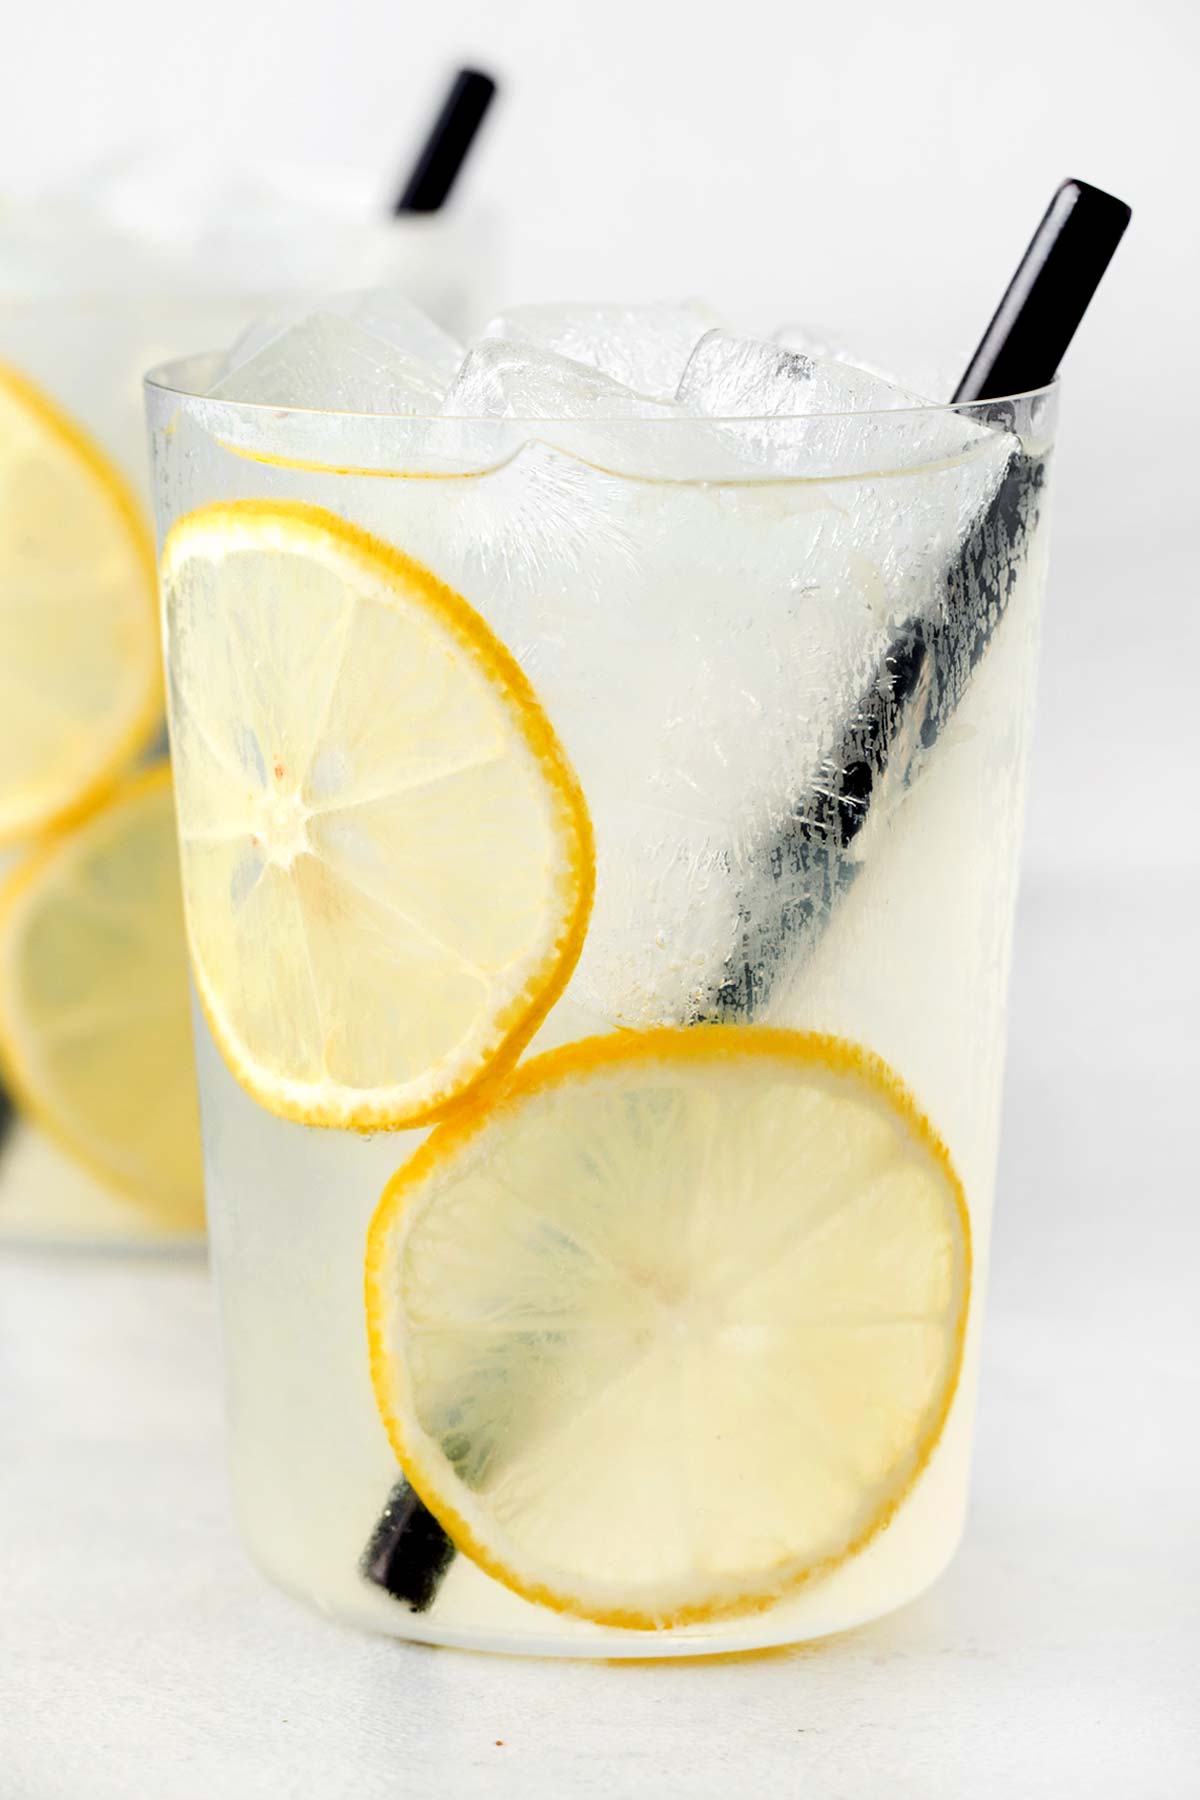 Homemade lemonade in clear glass with straw.